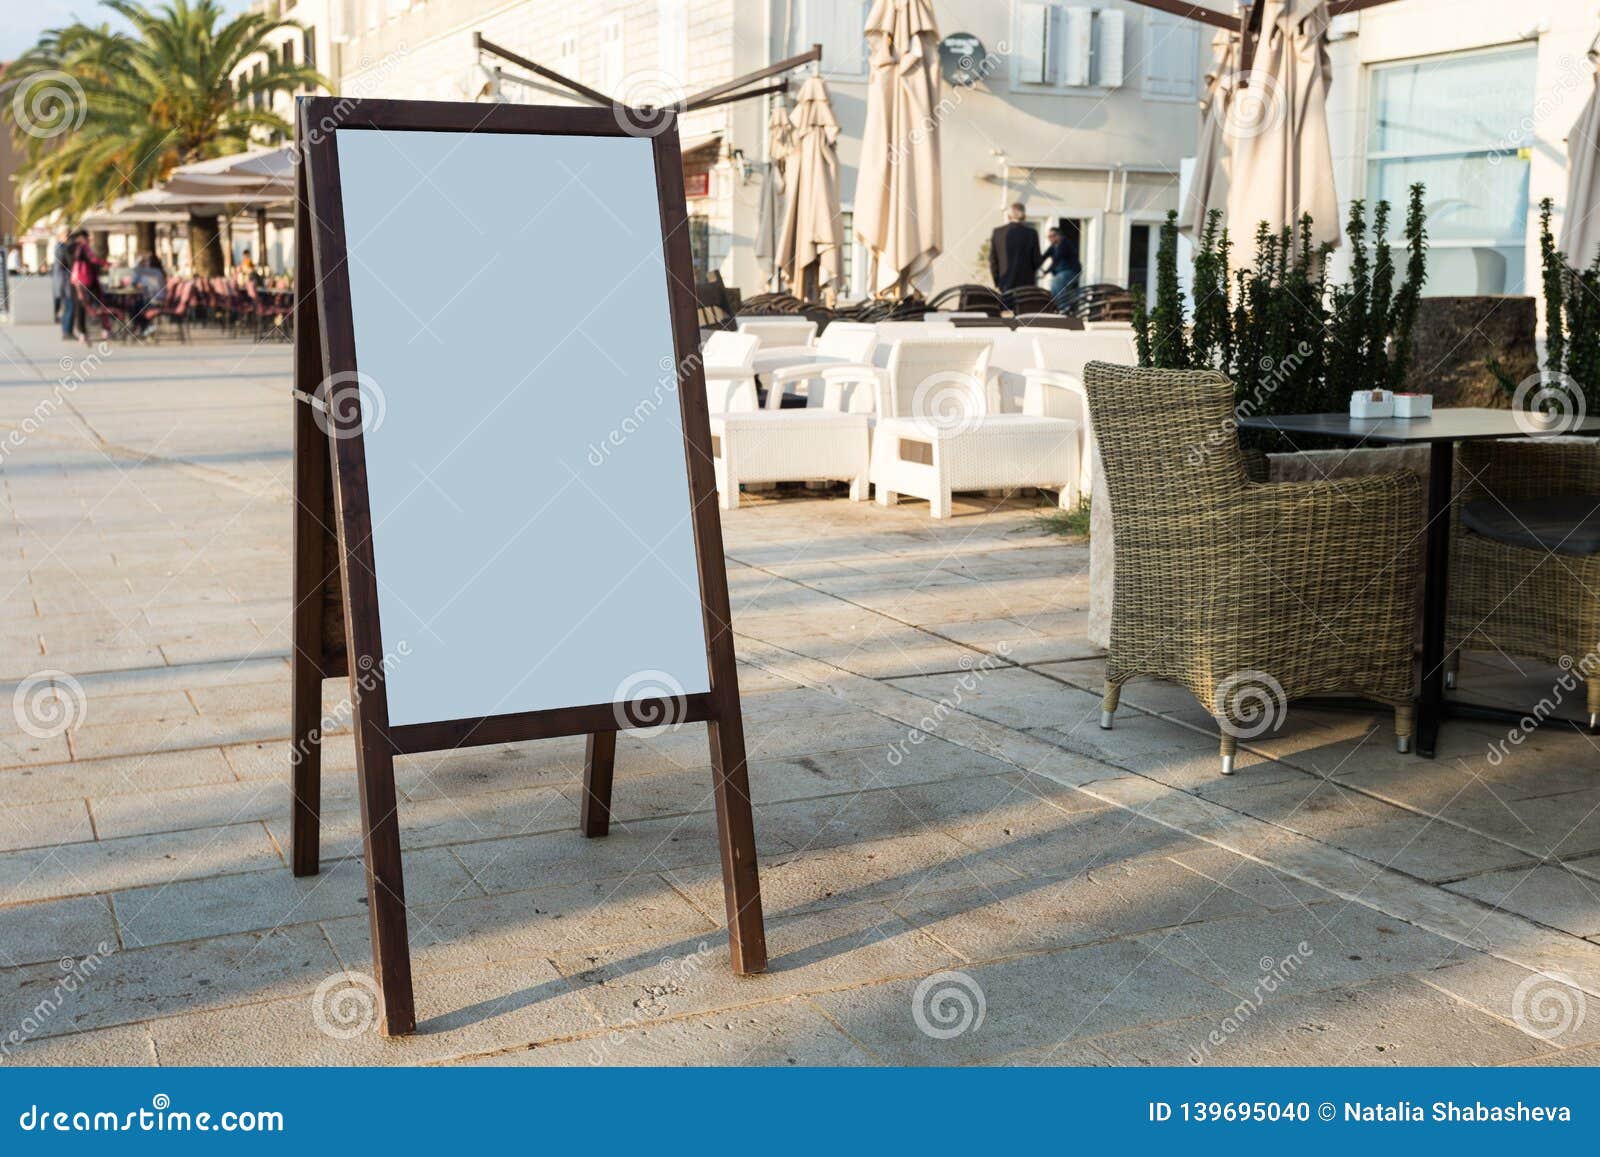 Download Blank White Outdoor Advertising Stand Sandwich Board Mock Up Template Stock Photo Image Of Board Shop 139695040 PSD Mockup Templates